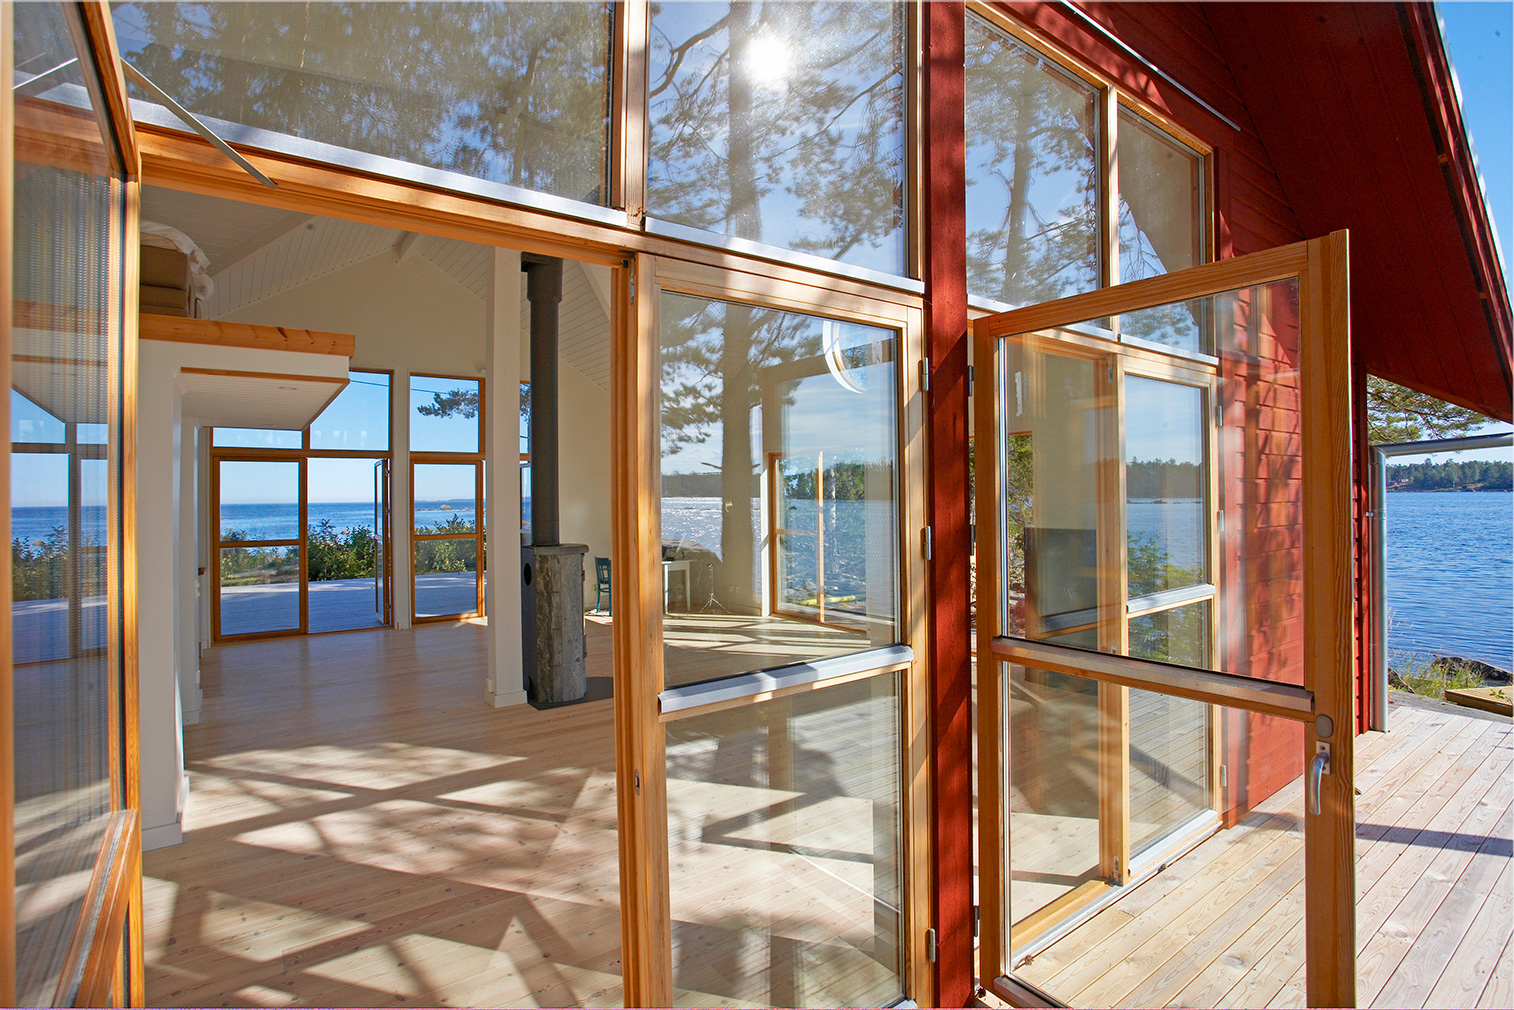 A private Swedish island with red cabin could be yours for 13.9m Kr